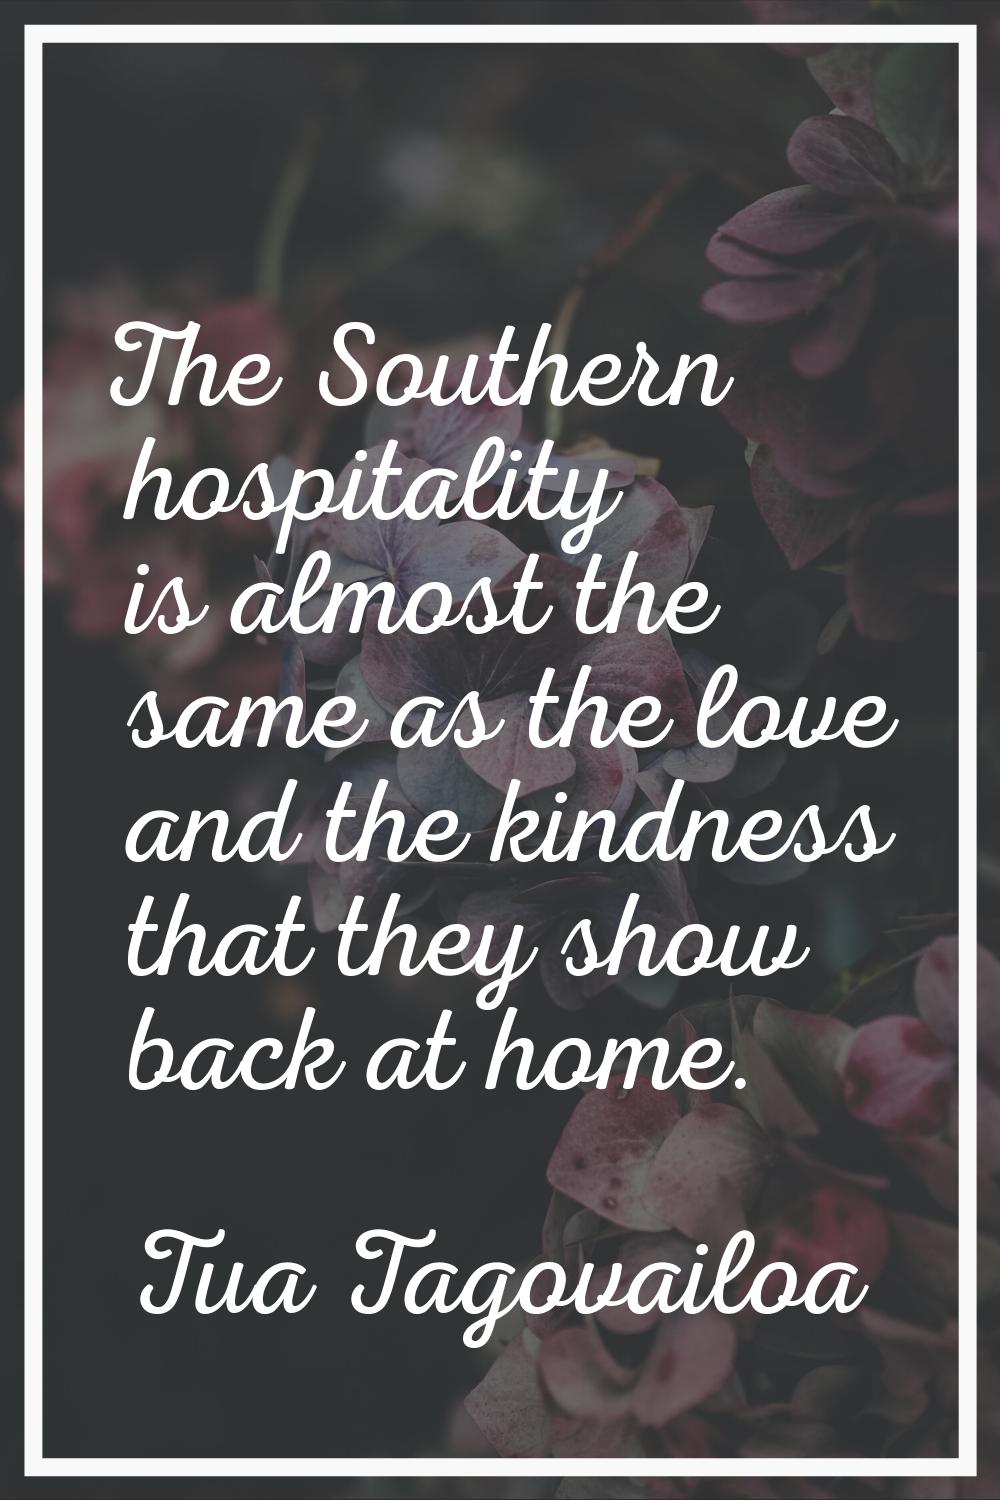 The Southern hospitality is almost the same as the love and the kindness that they show back at hom